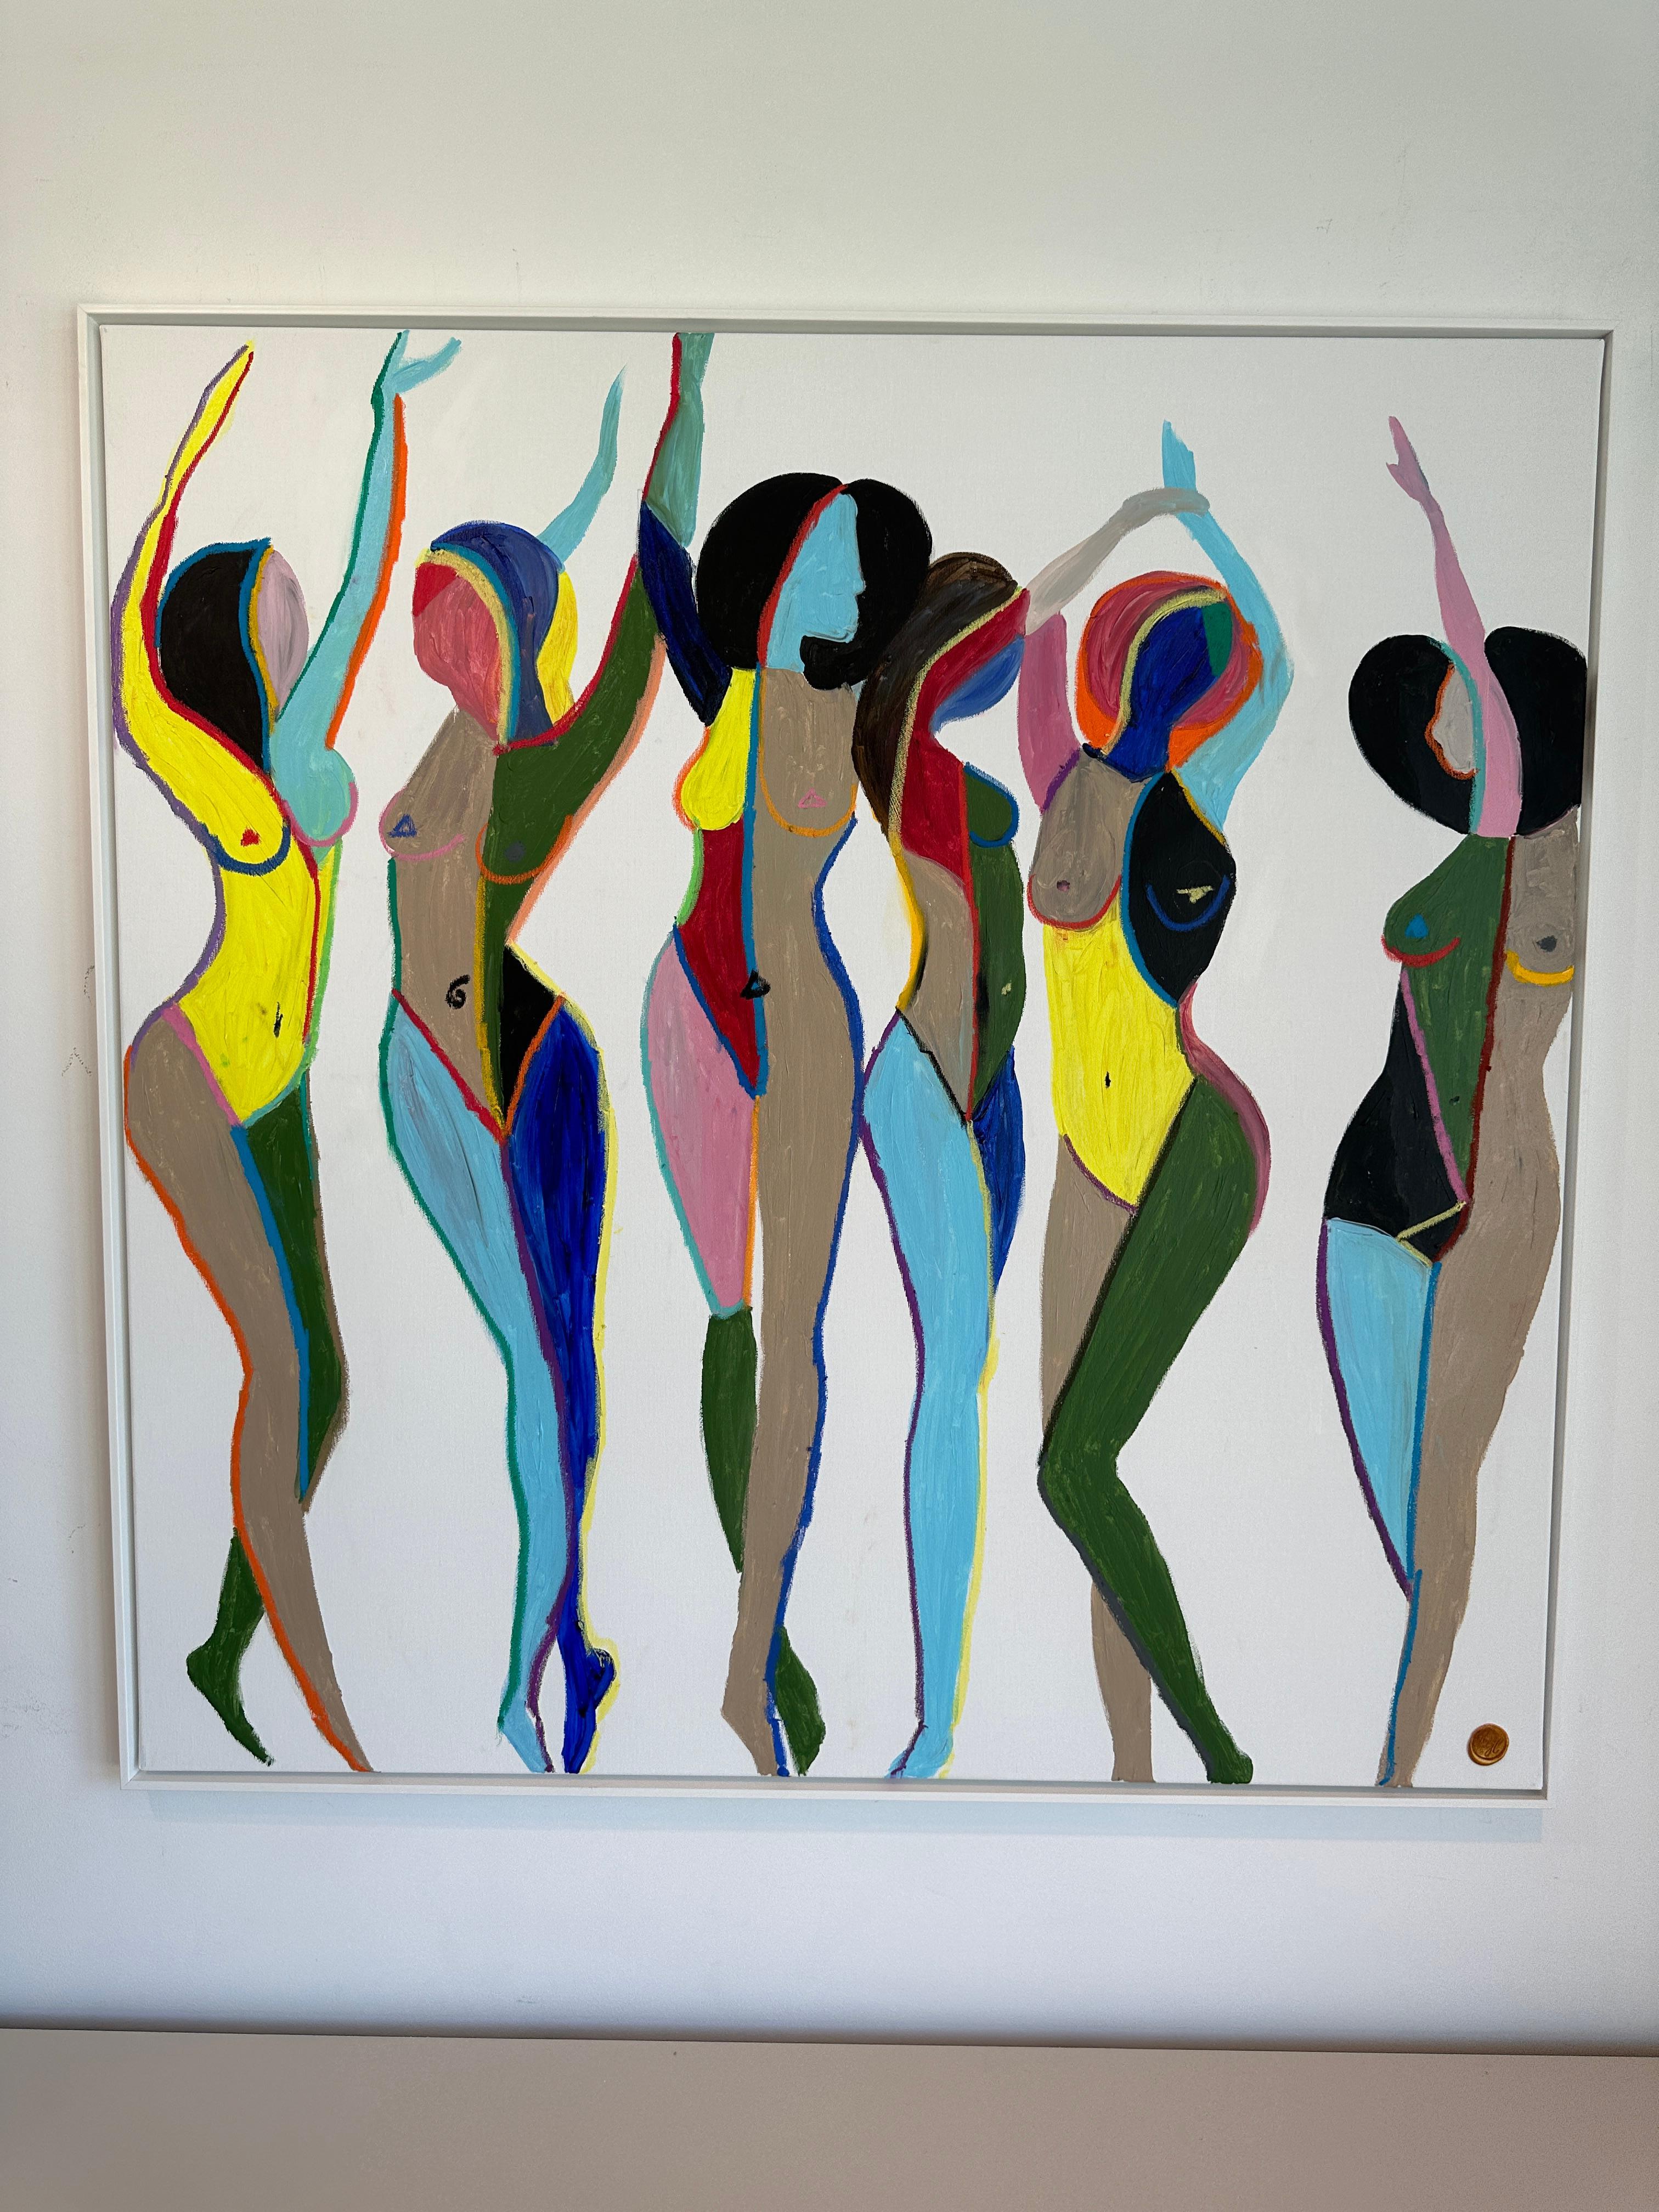 Joy after Matisse by K. Hormel - Colorful Dancers Contemporary Oil painting - Painting by Katharina Hormel